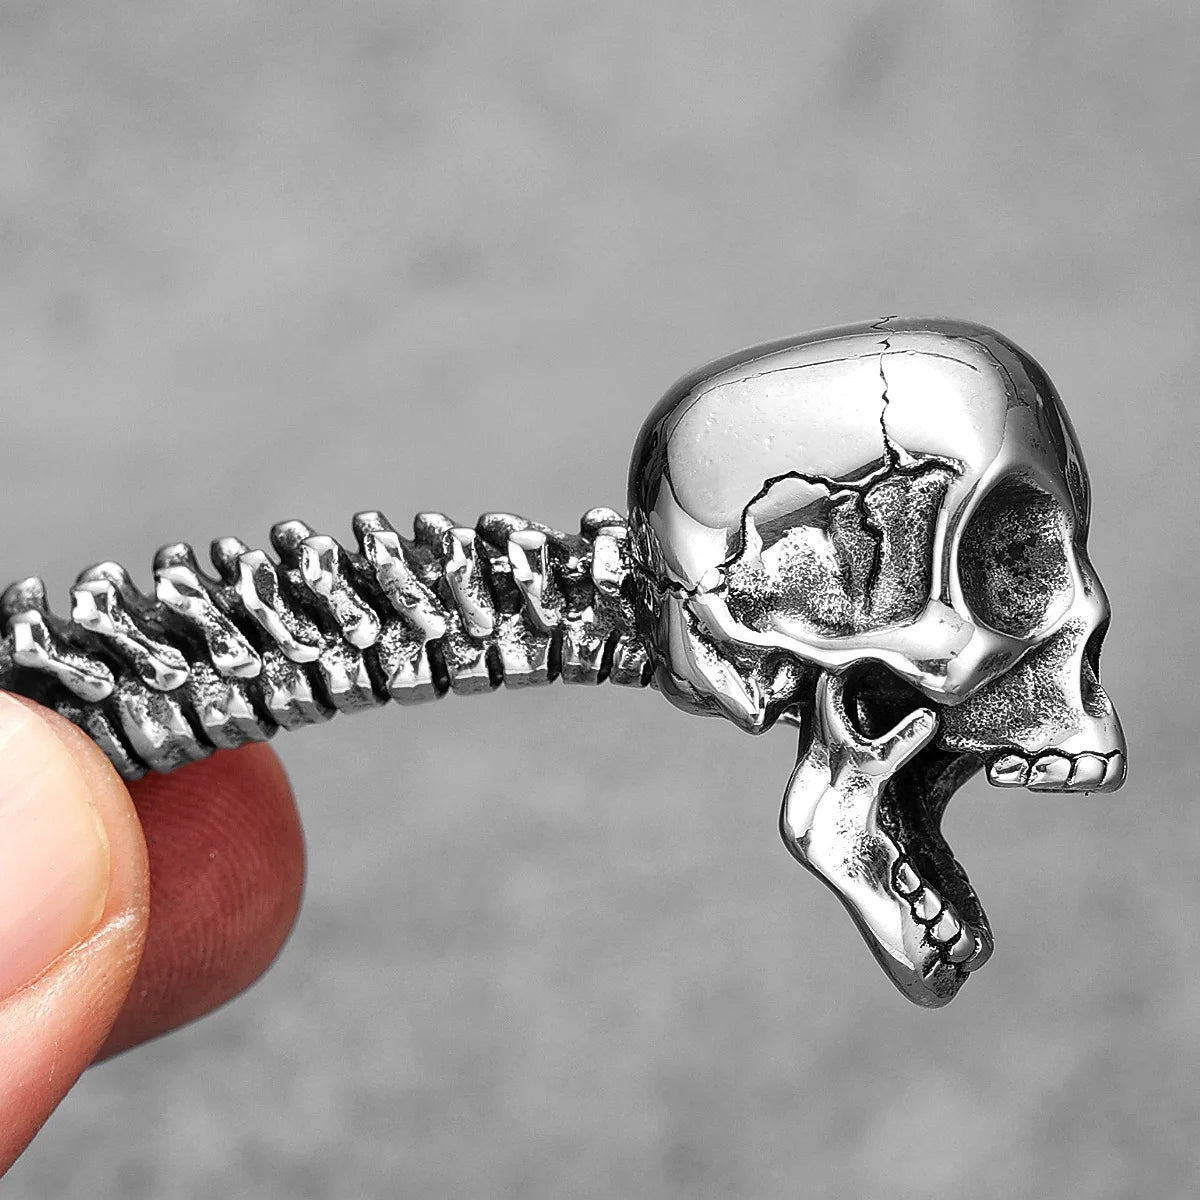 Skull Spine Stainless Steel Necklace Pendant. Badass gifts for badass. Badass birthday gifts. Badass Christmas gifts for badasses. Badass skull accessories. Valentine gifts for him and her. Anniversary gift for him and her. Anniversary gift for my badass husband and wife. Badass Birthday gift for my badass boyfriend and girlfriend. Badass Birthday gift for my badass husband and wife.